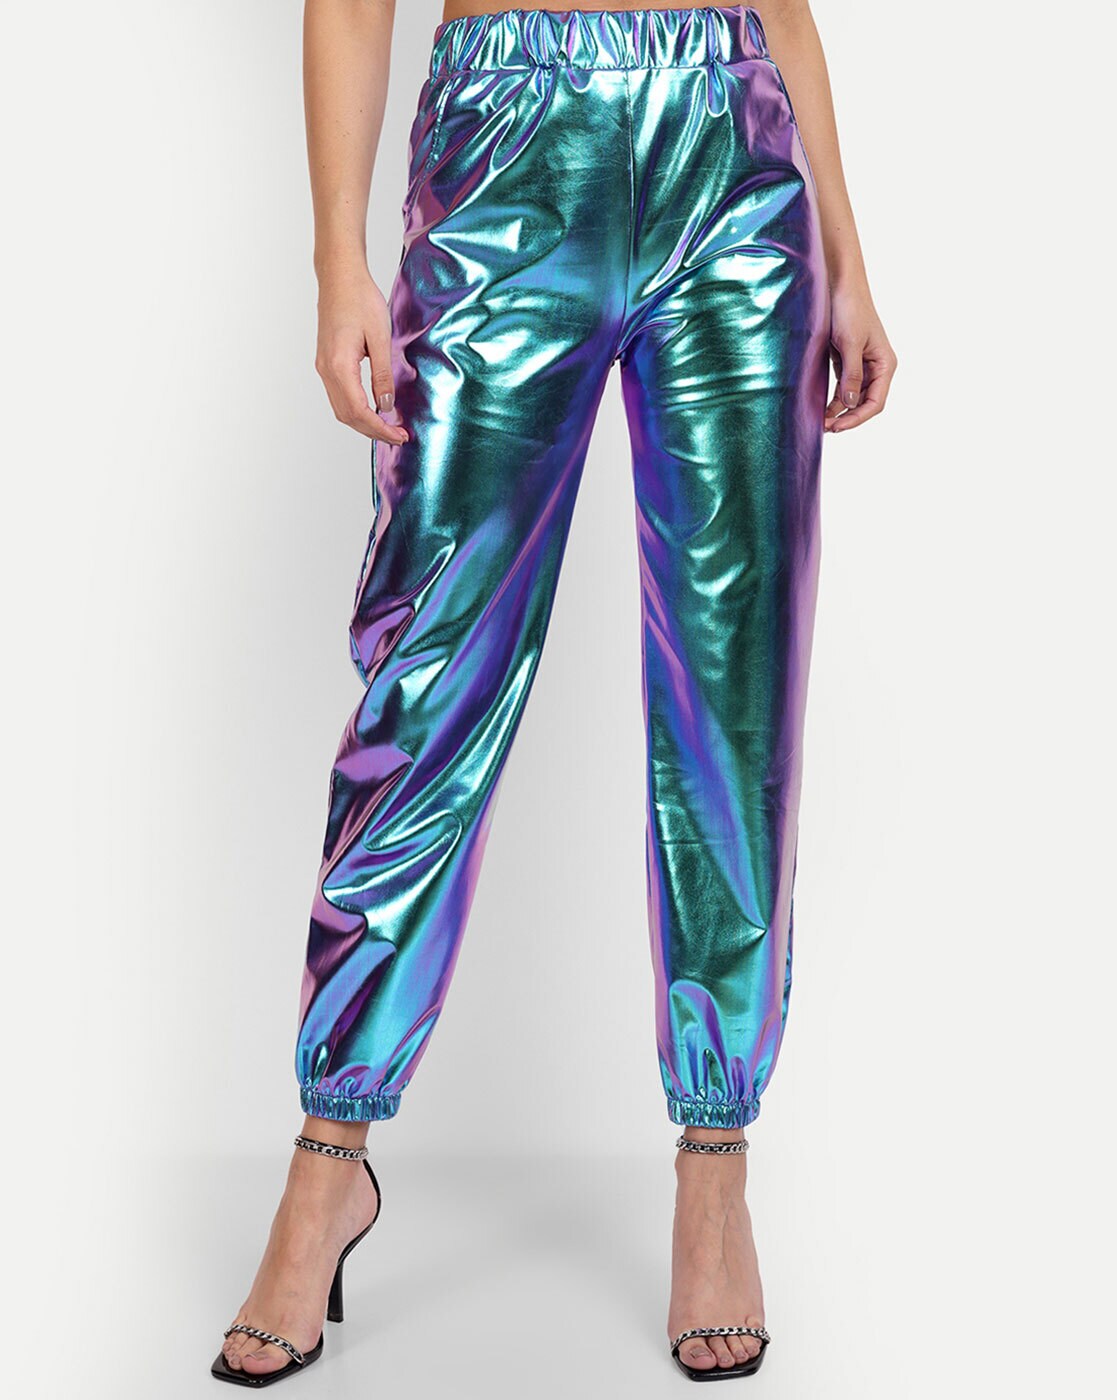 Buy Allegra K Women's Metallic Trousers Shiny Sparkle Elastic Waist  Holographic Pants, Green, Small at Amazon.in